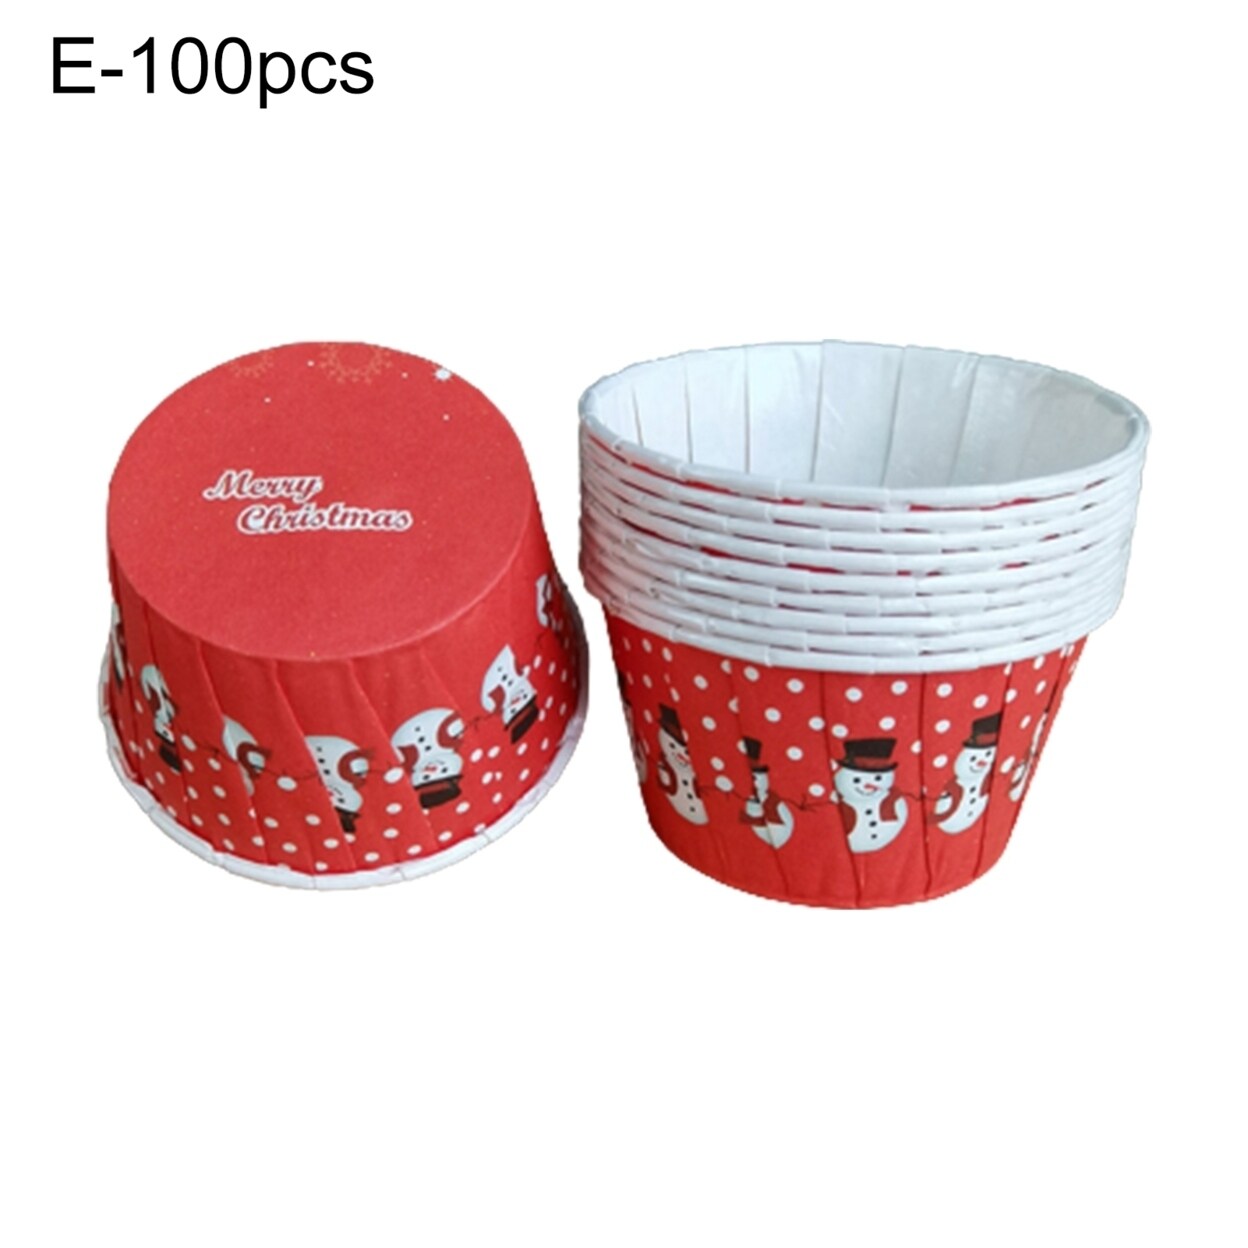 https://ak1.ostkcdn.com/images/products/is/images/direct/d6ef93b1fe589f3d47fabf3aba1a39163c086bb0/100Pcs-Cake-Liners-Creative-Pattern-Heat-Resistant-Paper-Greaseproof-Xmas-Baking-Cupcake-Wrappers-For-Home.jpg